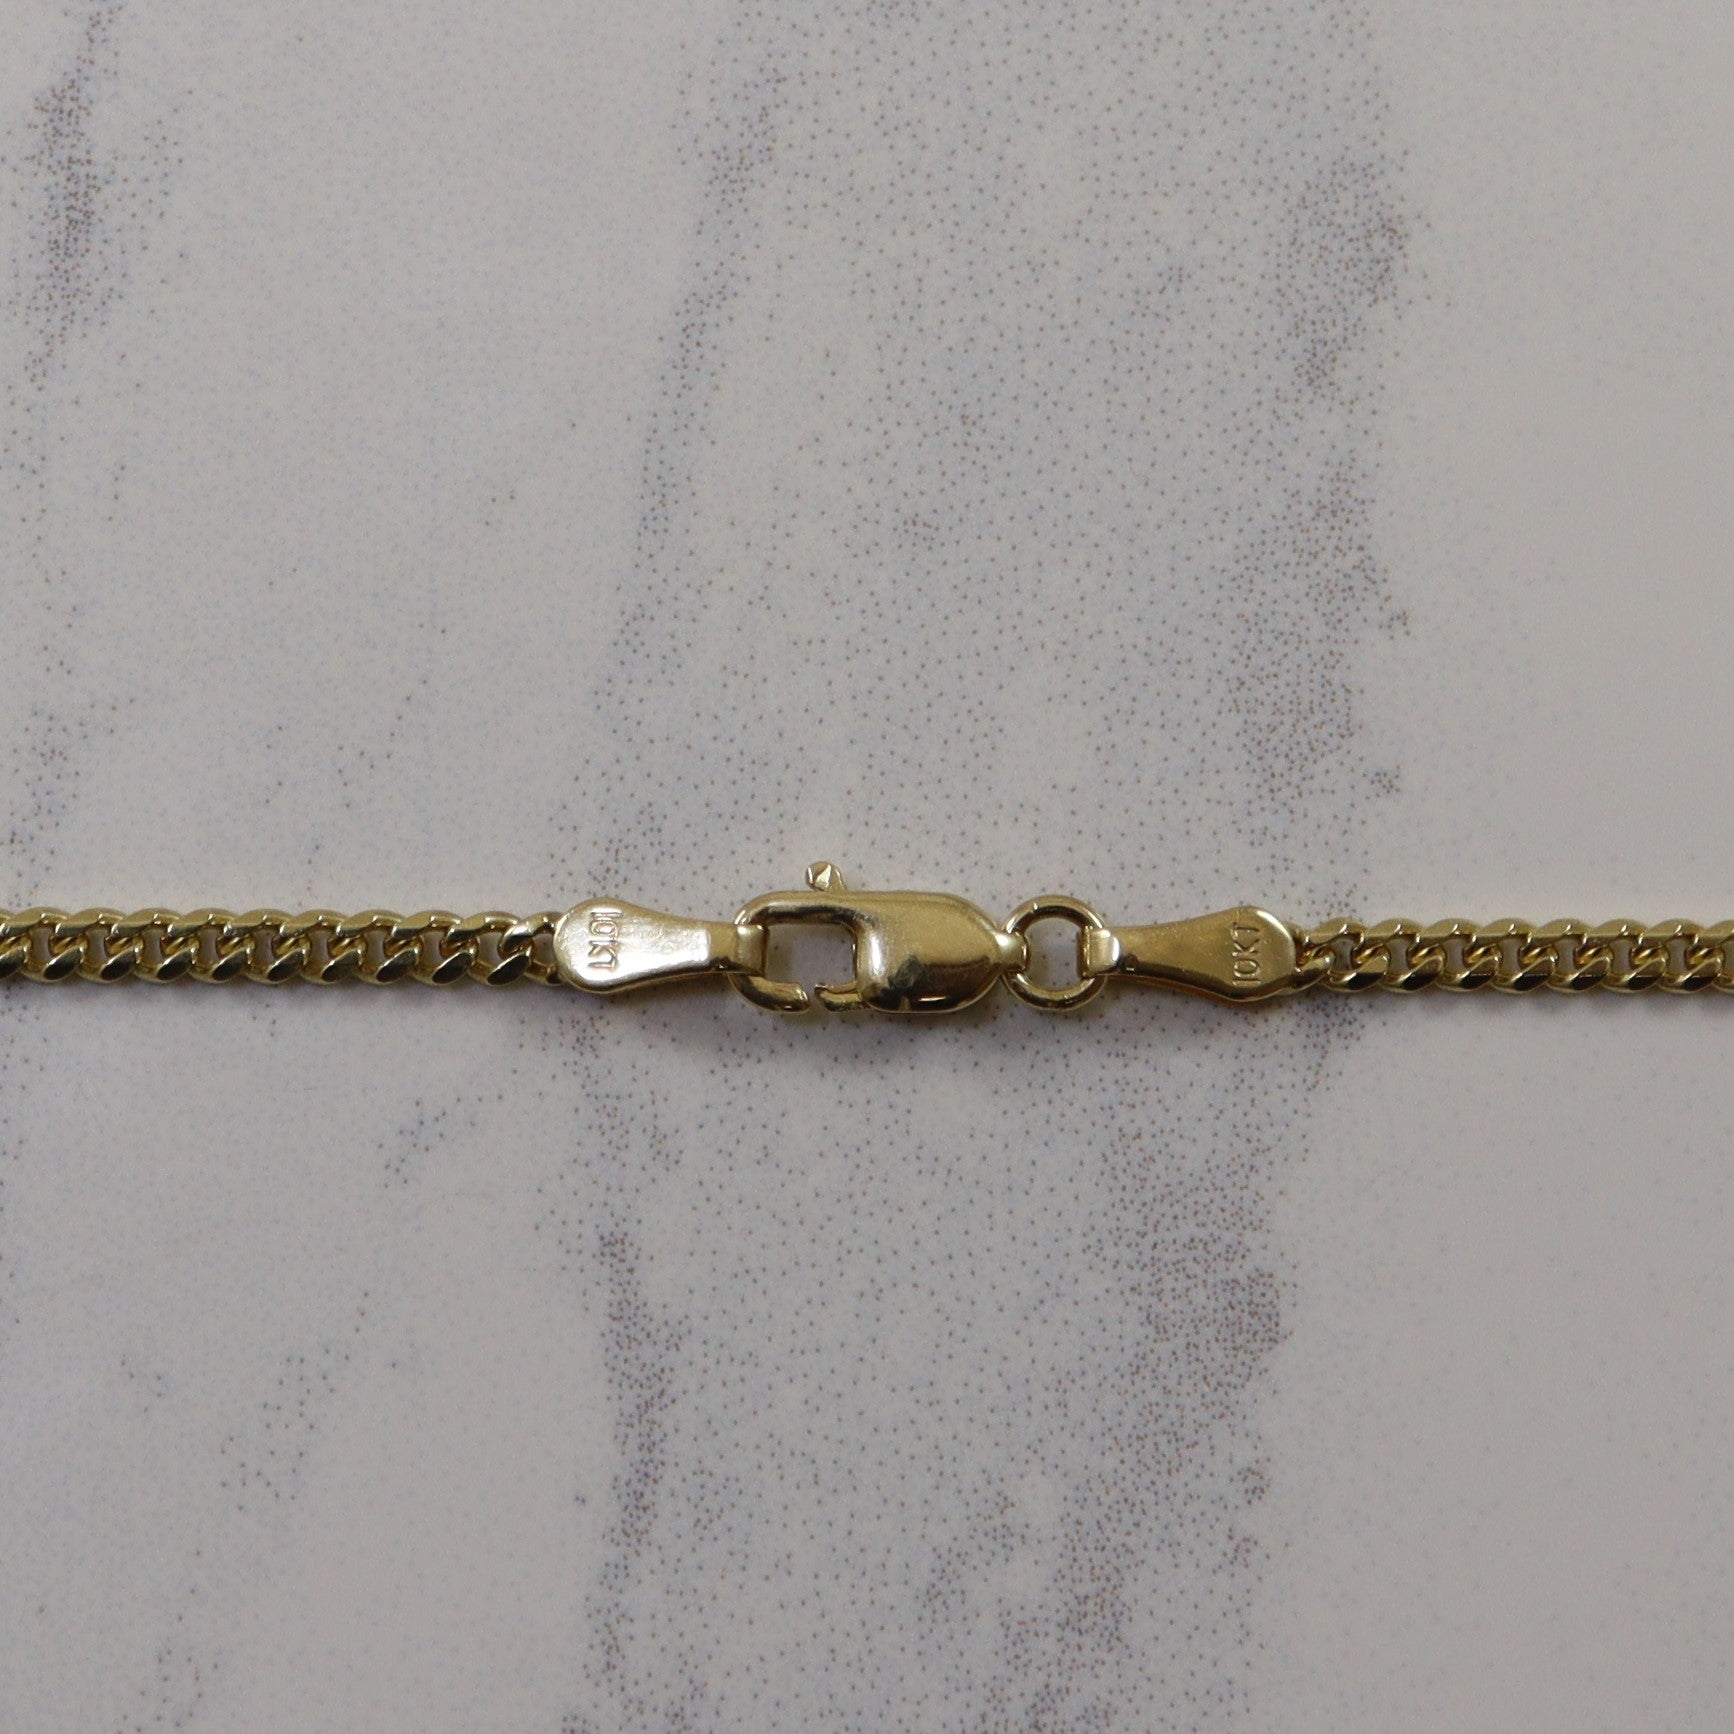 10k Yellow Gold Curb Chain | 24.5